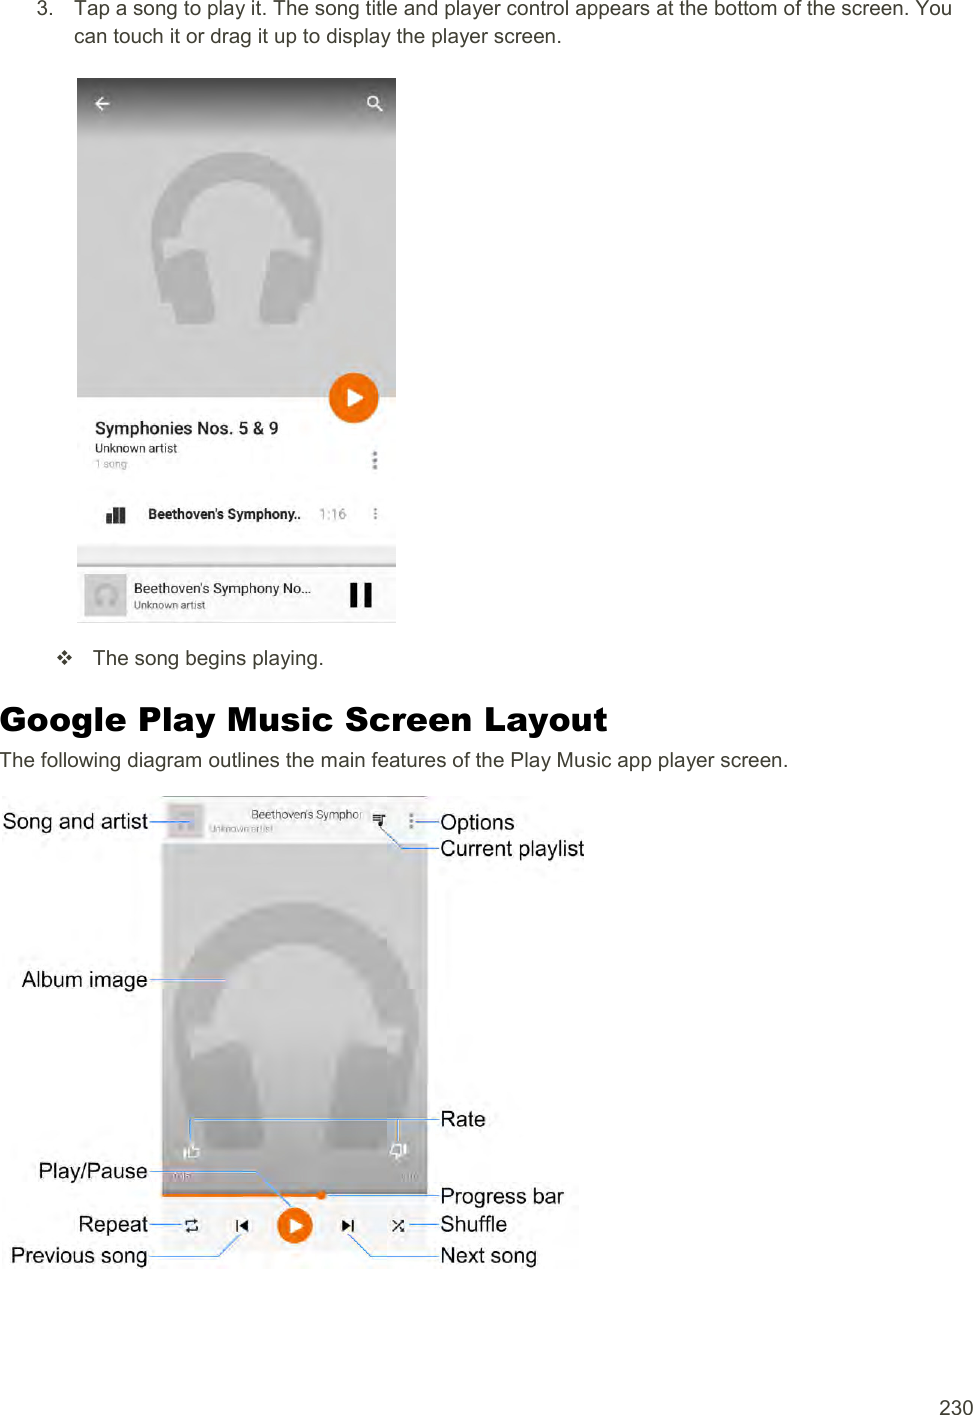  230 3.  Tap a song to play it. The song title and player control appears at the bottom of the screen. You can touch it or drag it up to display the player screen.     The song begins playing. Google Play Music Screen Layout The following diagram outlines the main features of the Play Music app player screen.  